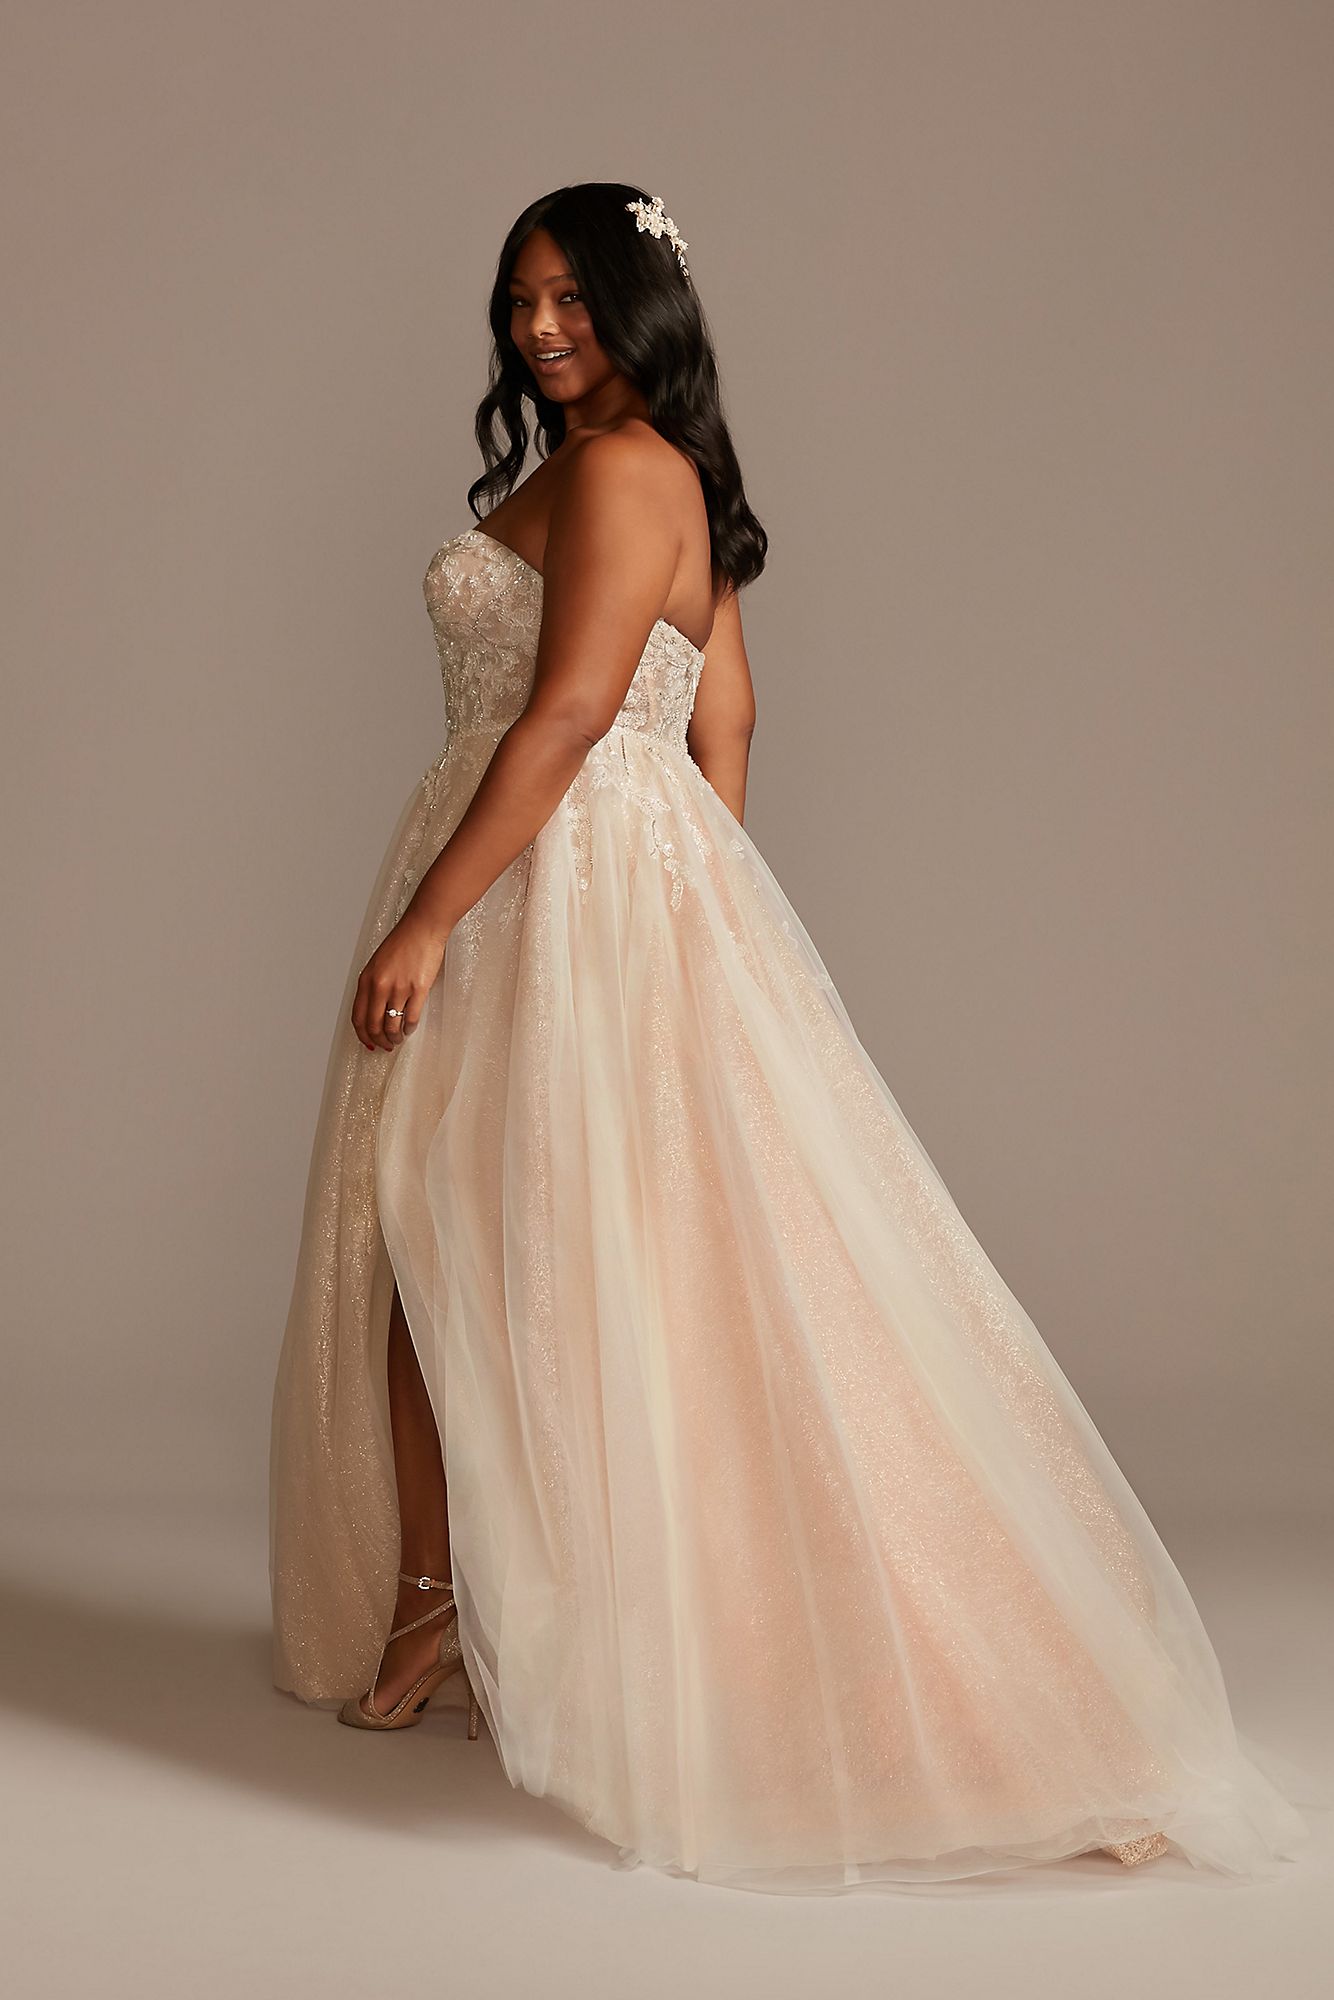 Floral Plus Size Wedding Dress with Metallic Tulle 9SWG871